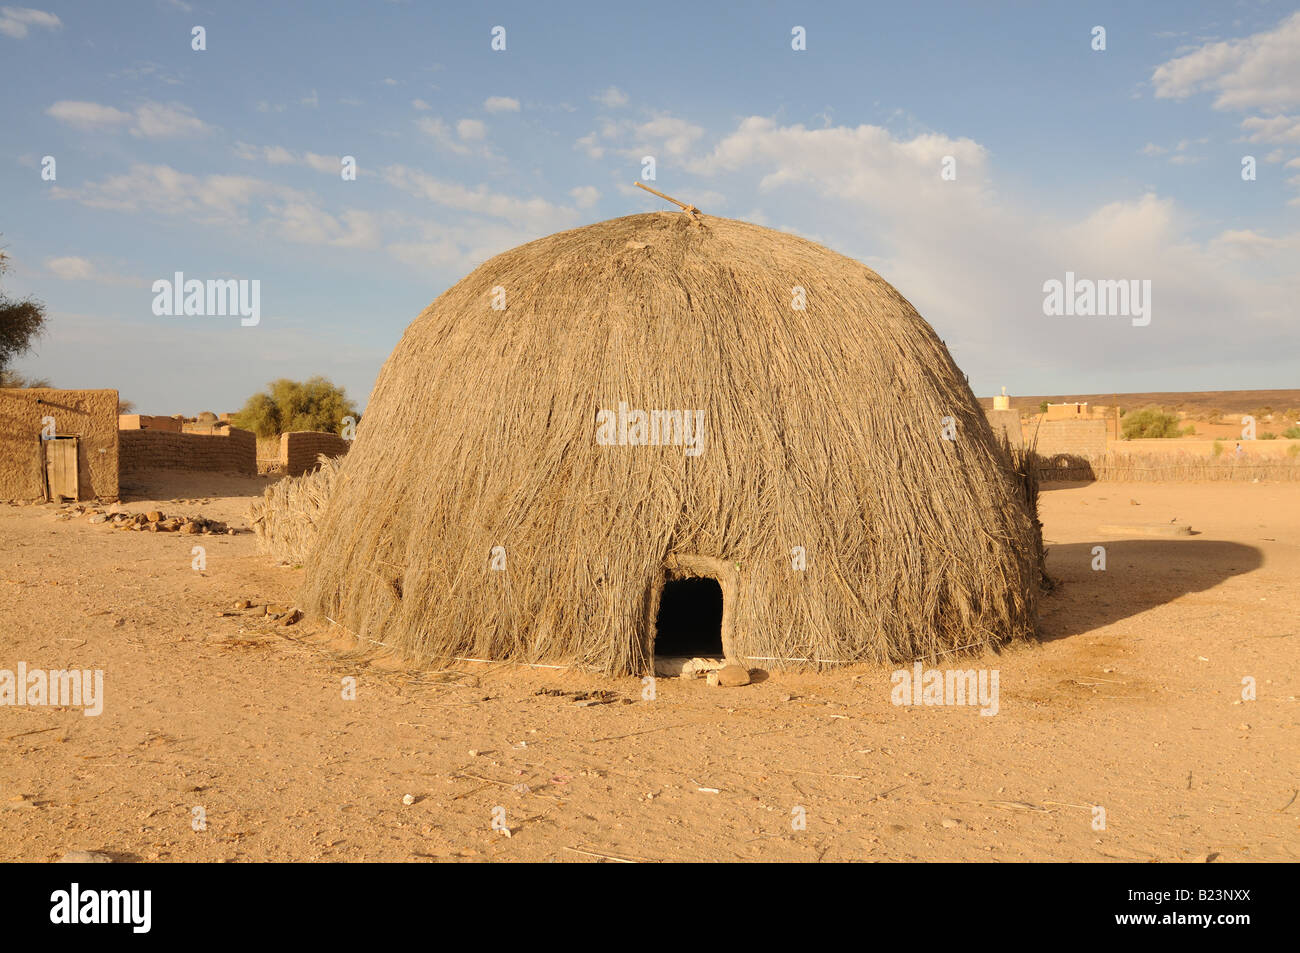 Traditional house made of straw on the countryside in the saharan desert Western Africa Mauritania Africa Stock Photo